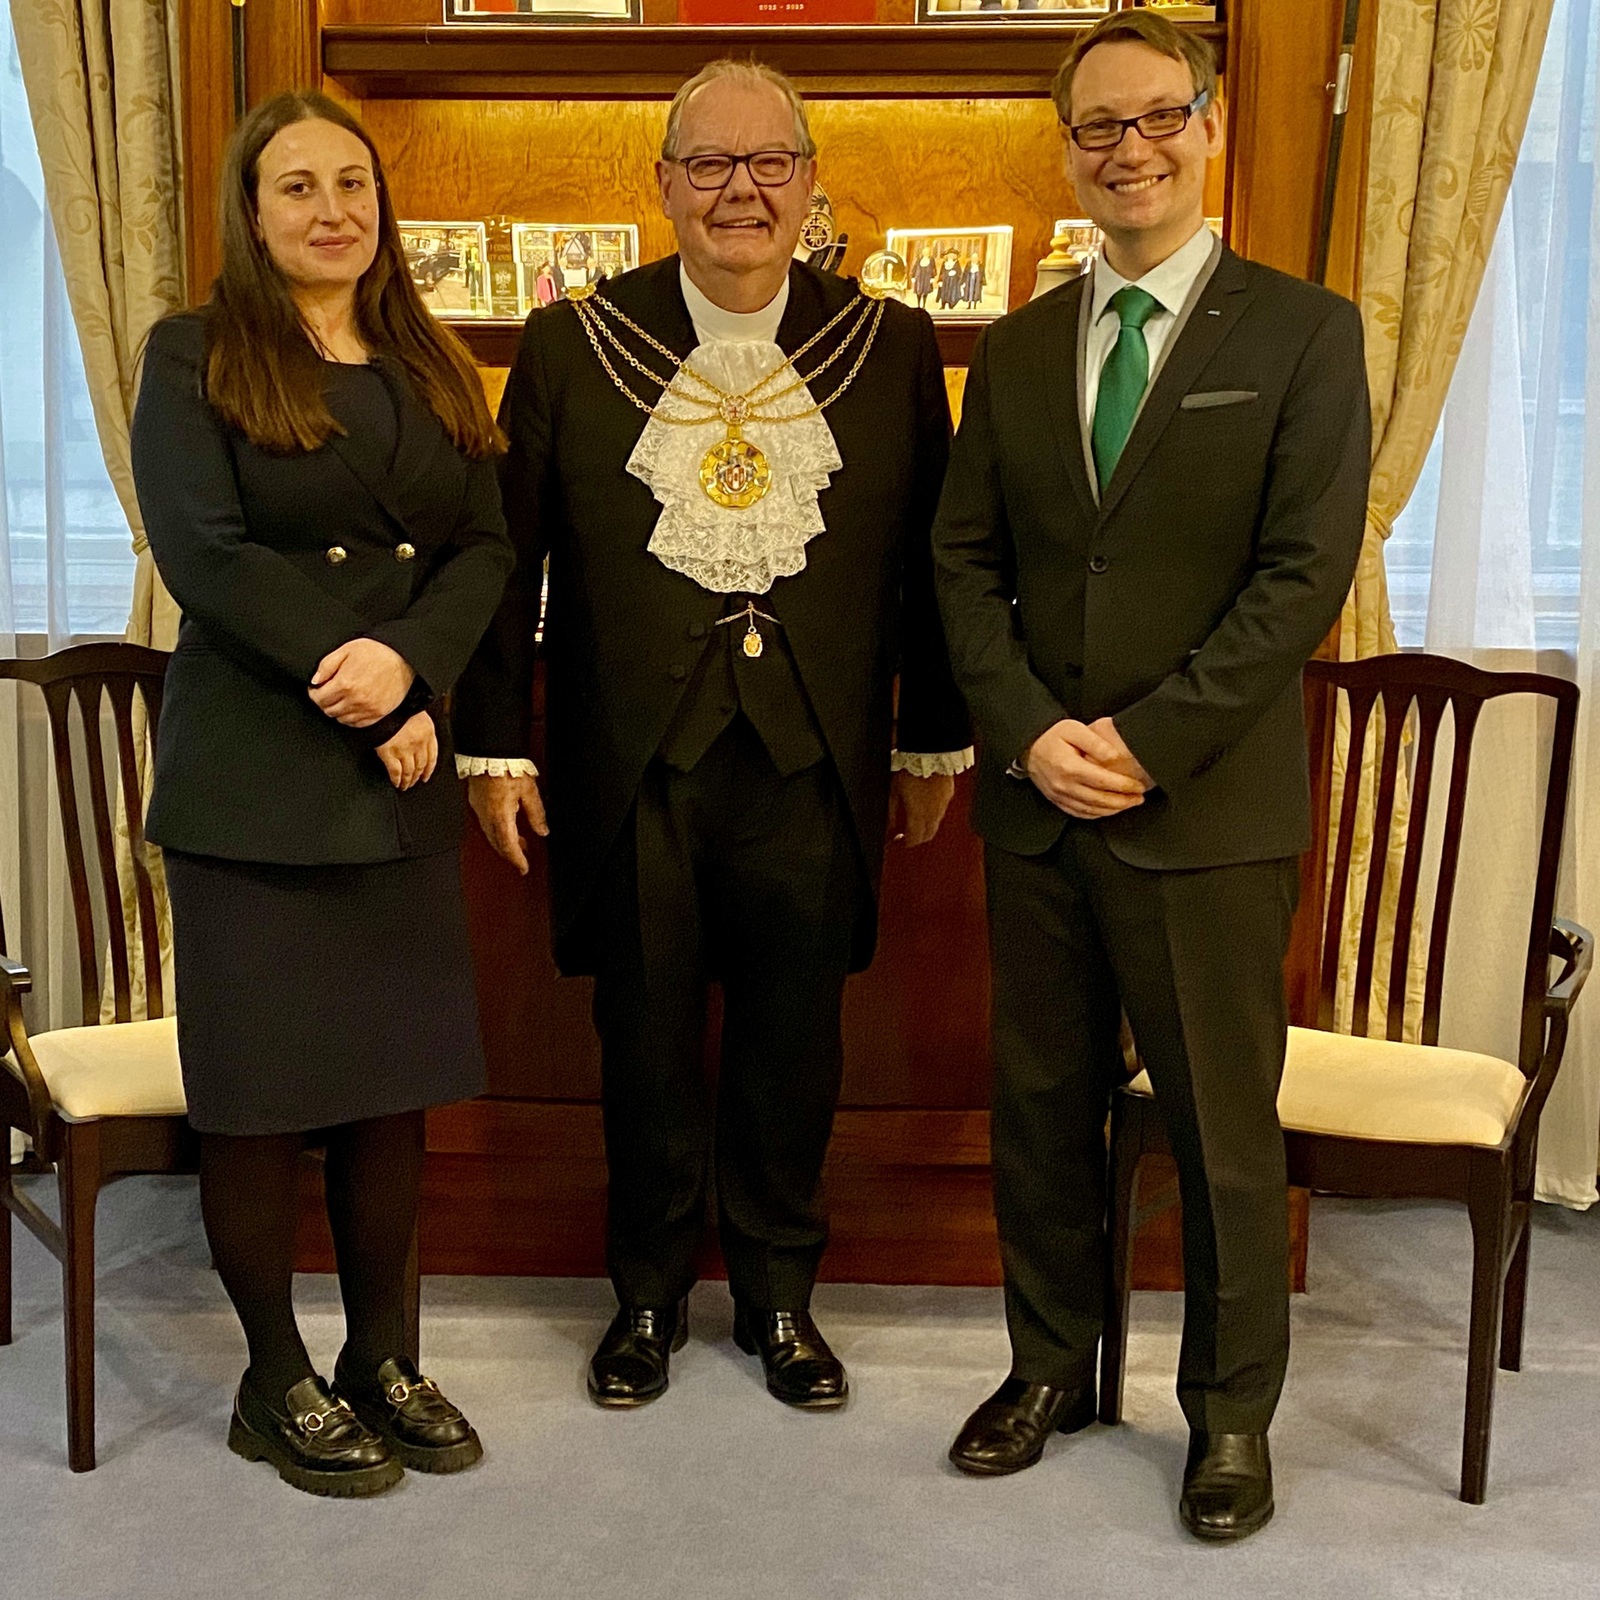 6 Mar 23 - Great to discuss matters of global entrepreneurship and potential training opportunities for young business people with Junior Chamber International World President Viktor Omarsson and JCI London President Beatrice Antonini at a meeting at The Old Bailey. 